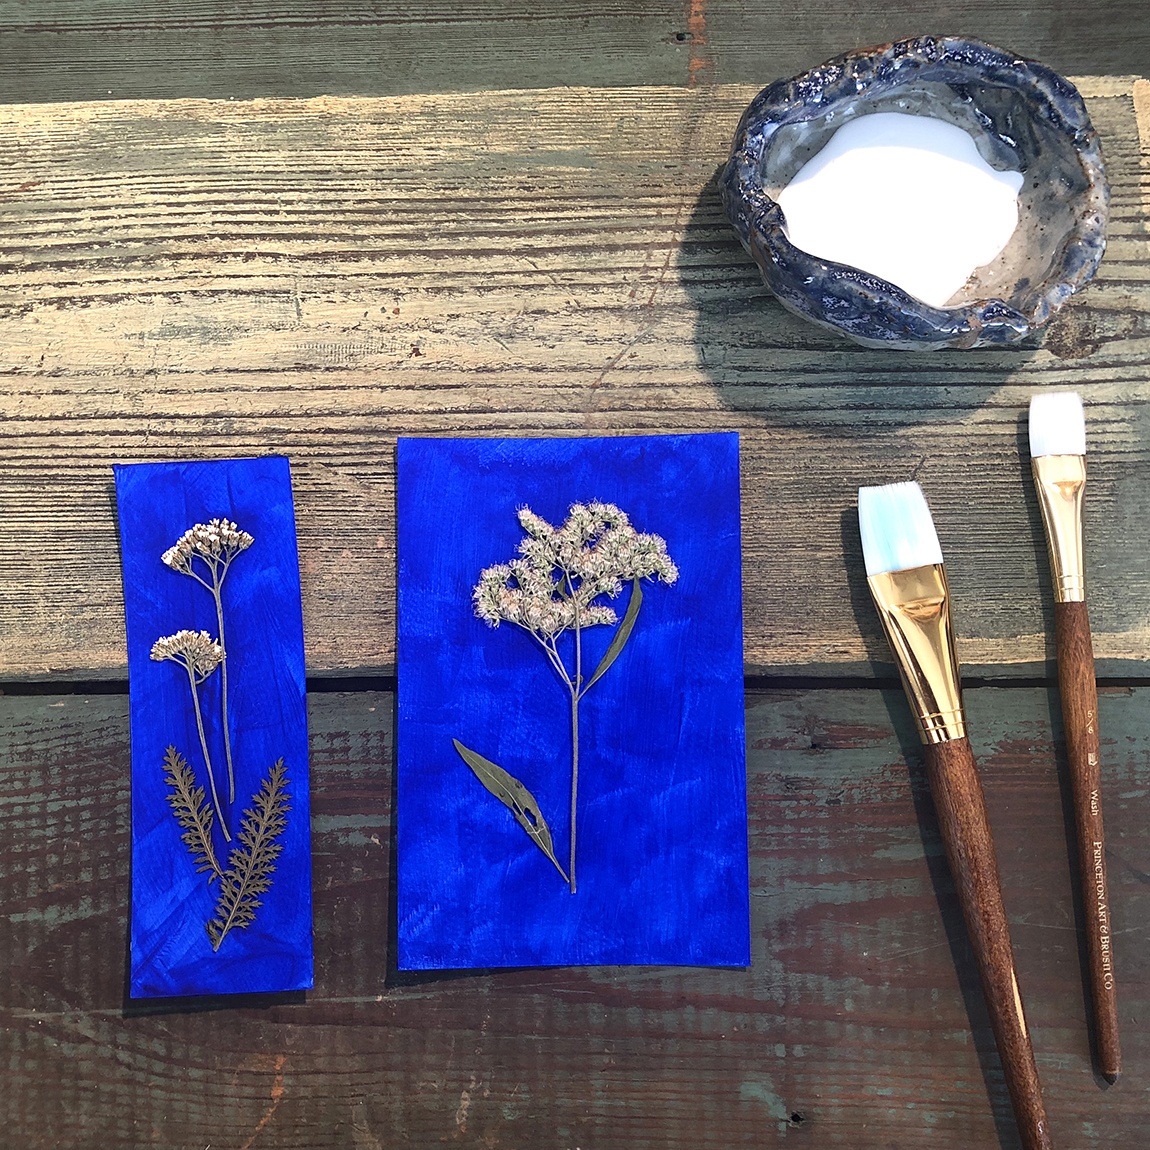 Two ultramarine paper bookmarks with plants arranged on them, beside two flat brushes and a container holding glue.